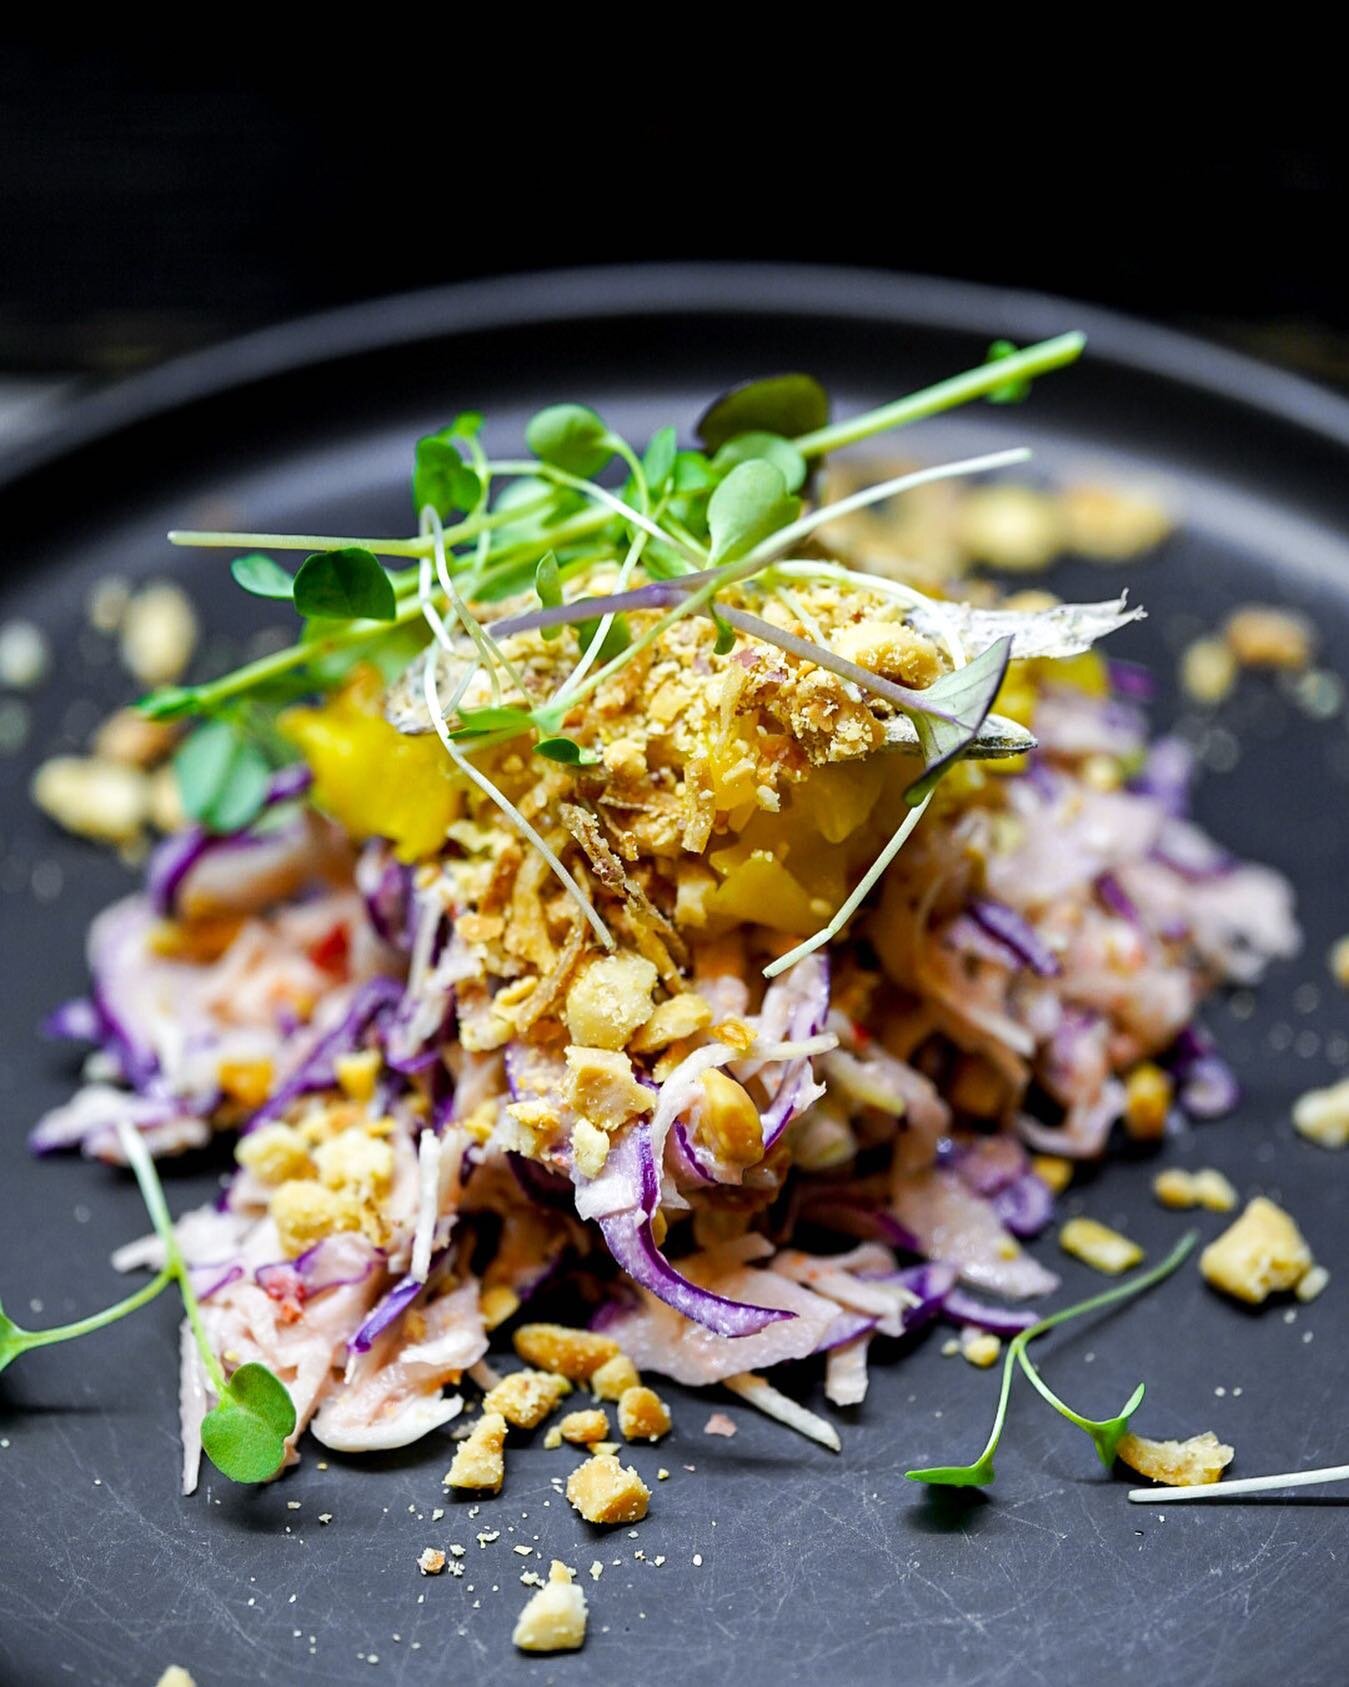 Thai Cabbage Salad (Custom Menu)
with chilli and garlic dressing, green mango, peanuts, and salted anchovy